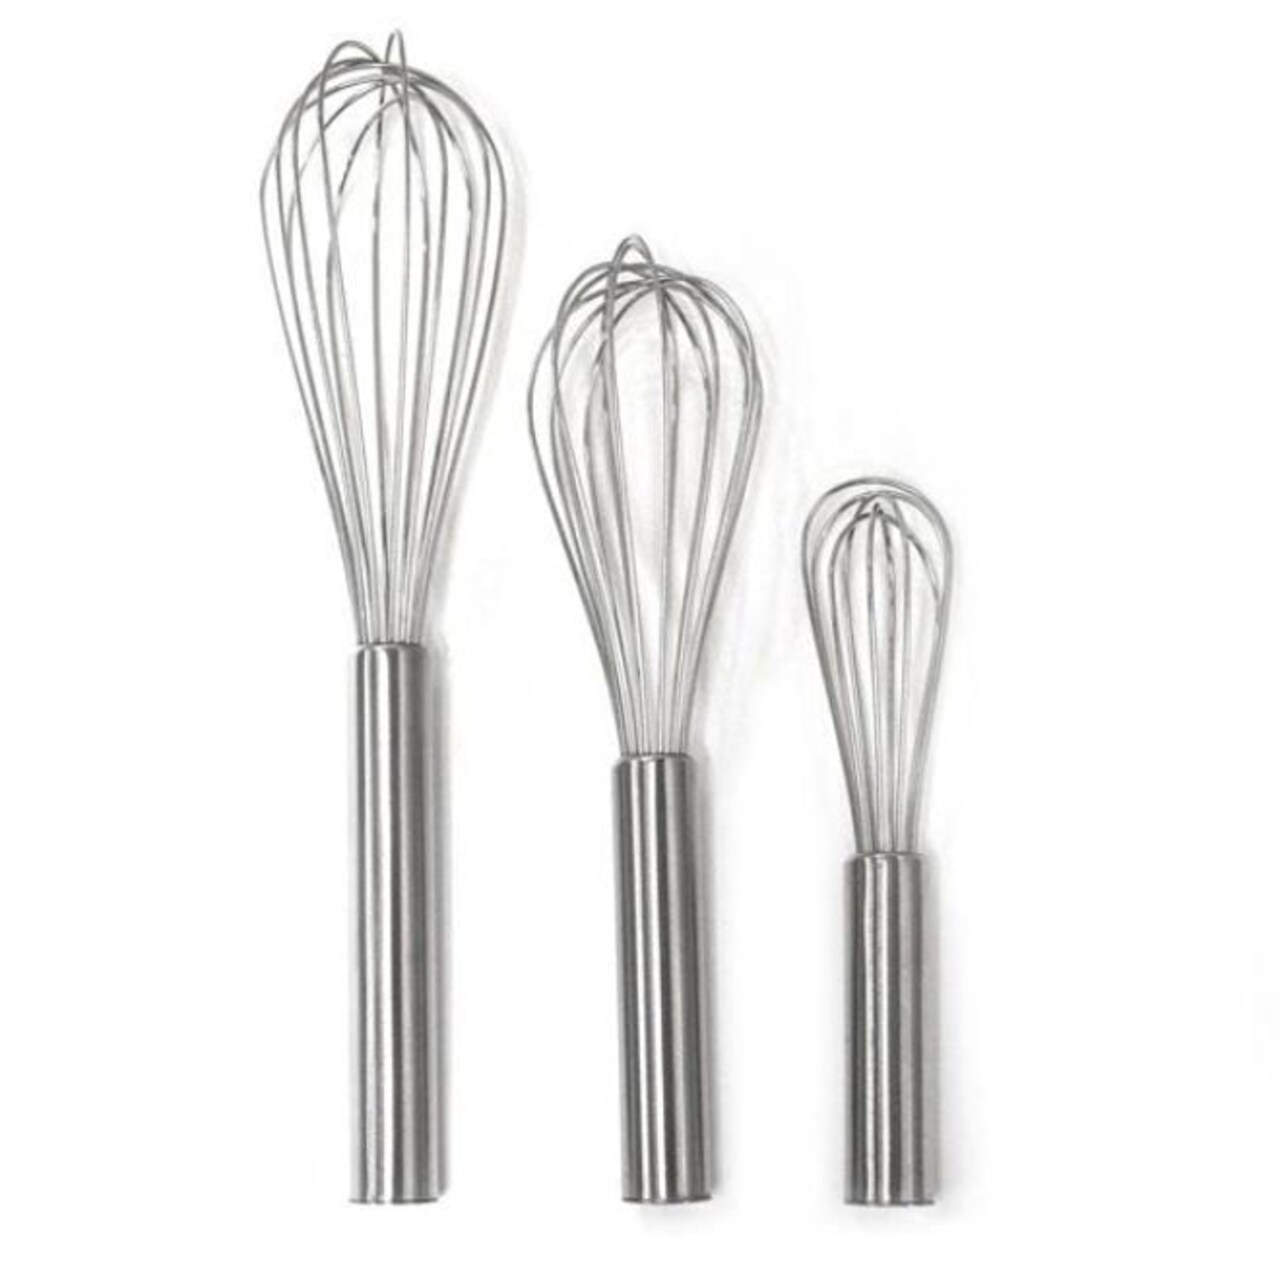 Norpro 3pc Stainless Steel Professional Balloon Wire Mixing Whisks - 6 8  & 10